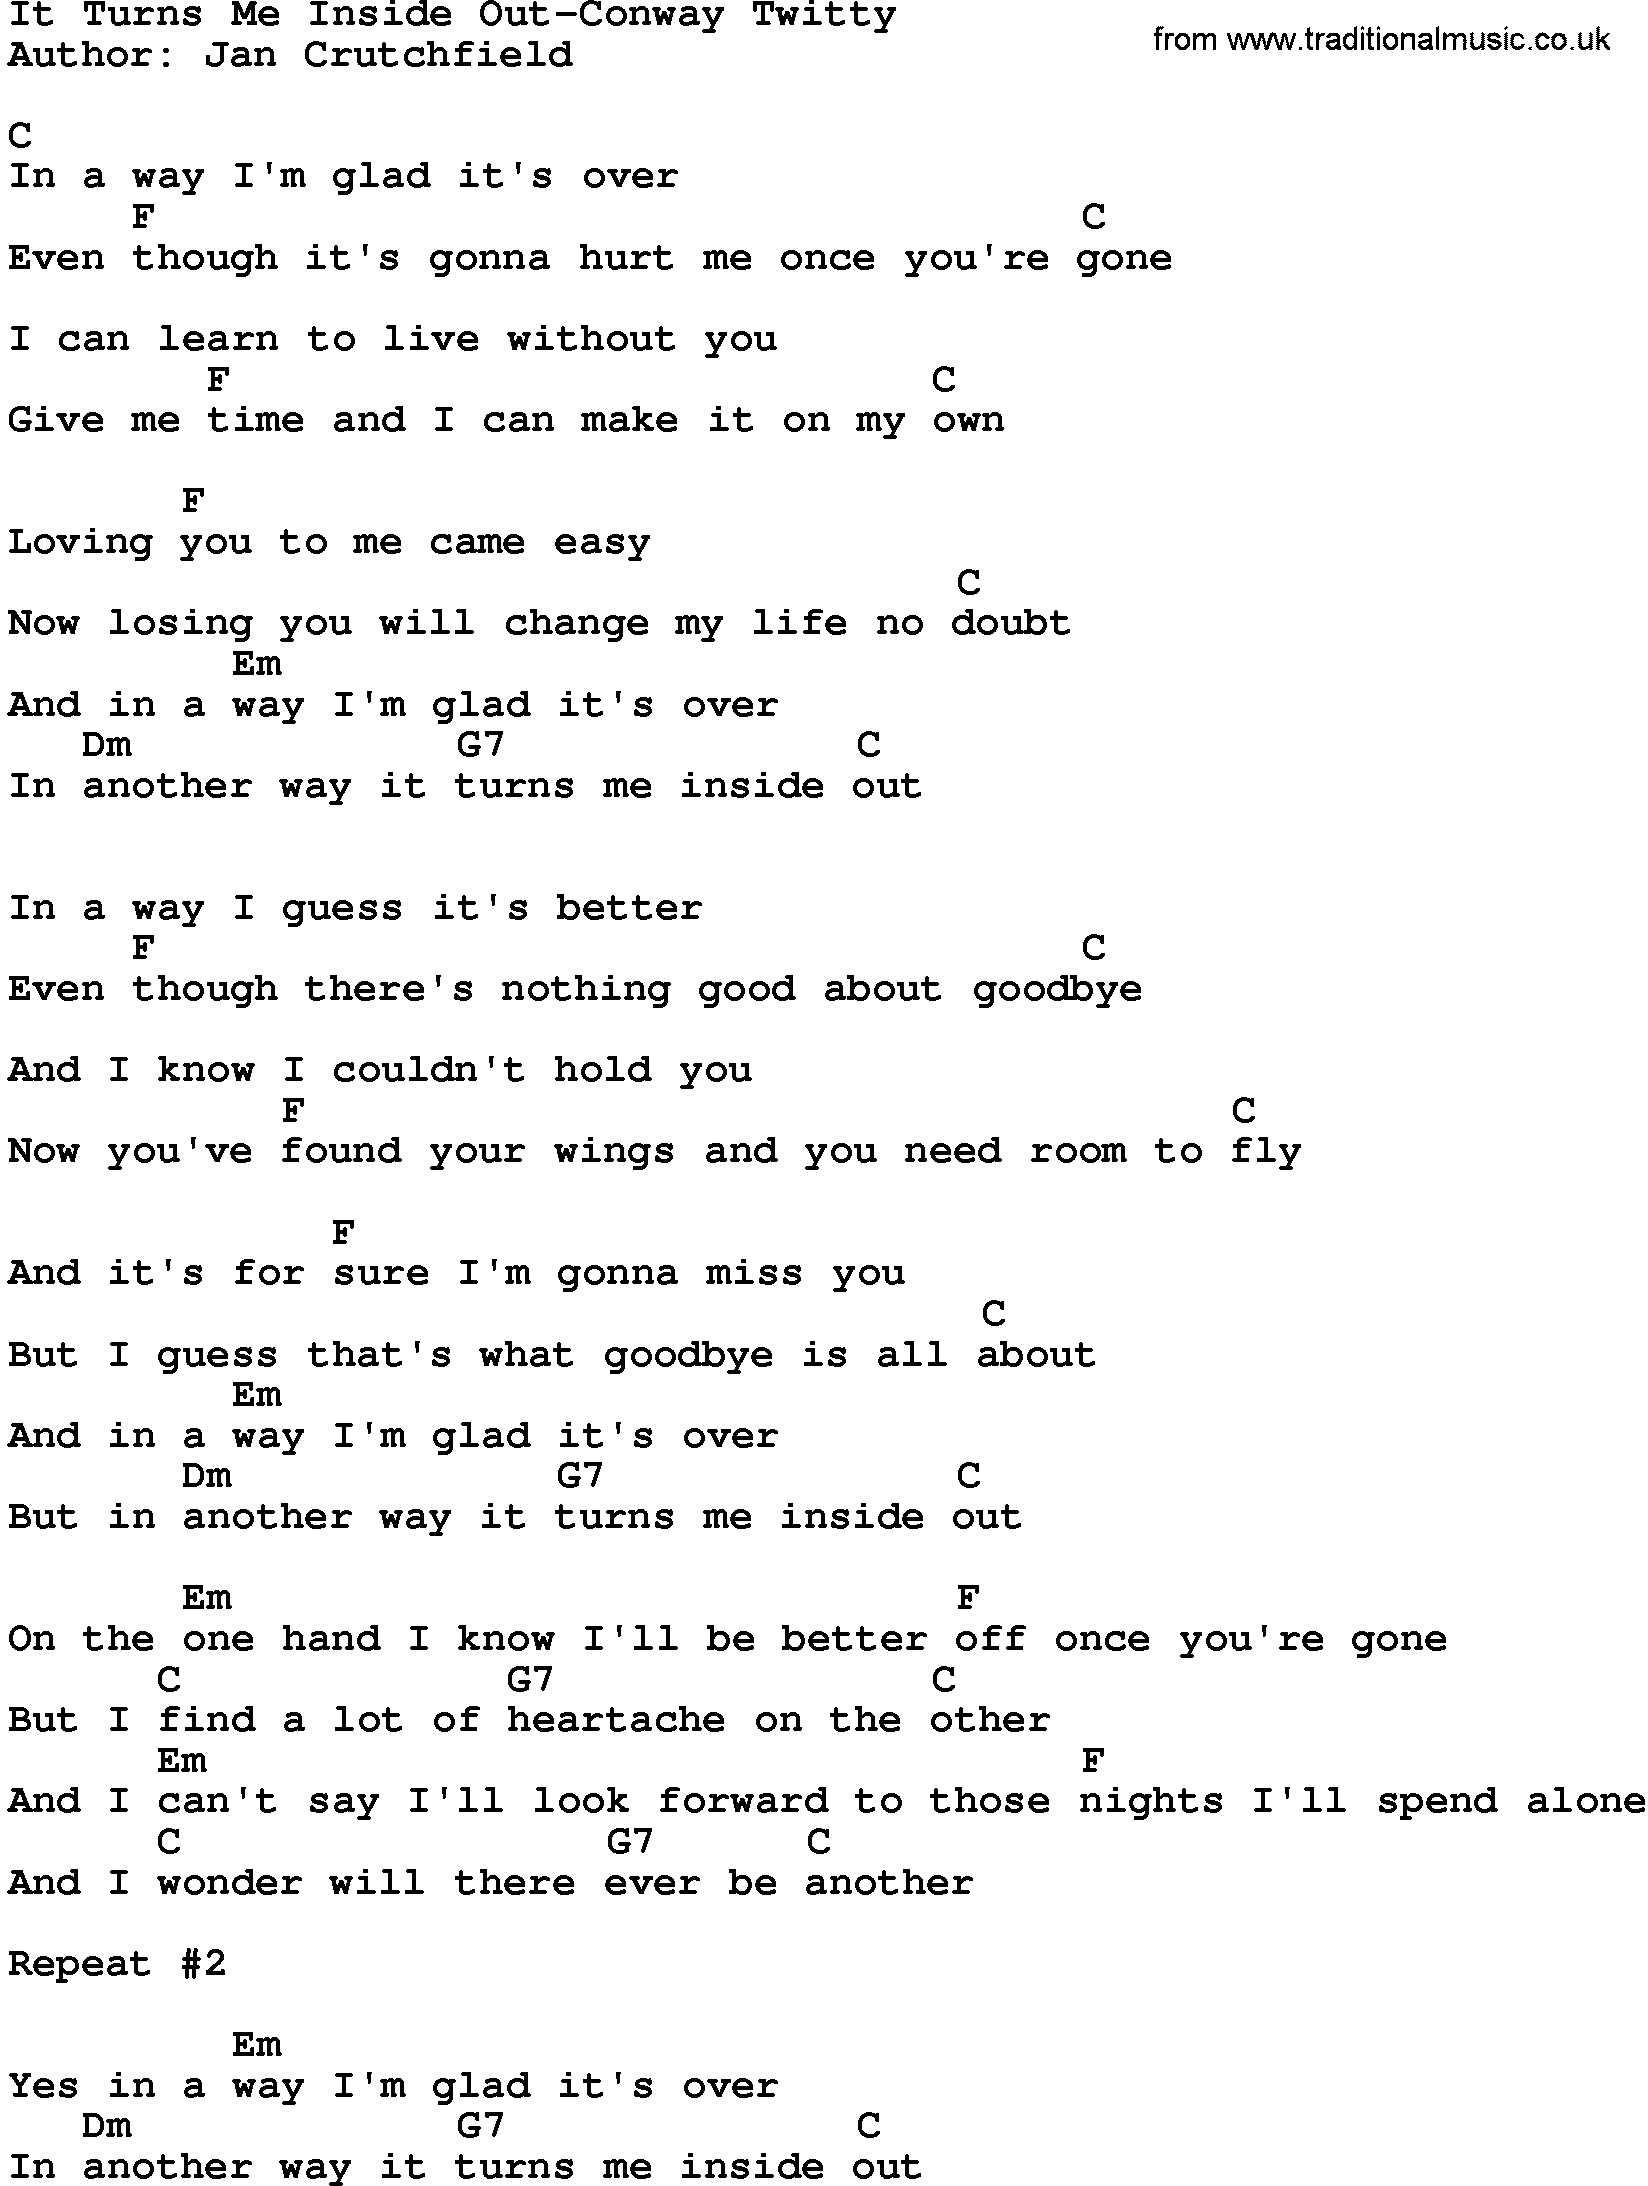 From The Inside Out Chords Country Musicit Turns Me Inside Out Conway Twitty Lyrics And Chords